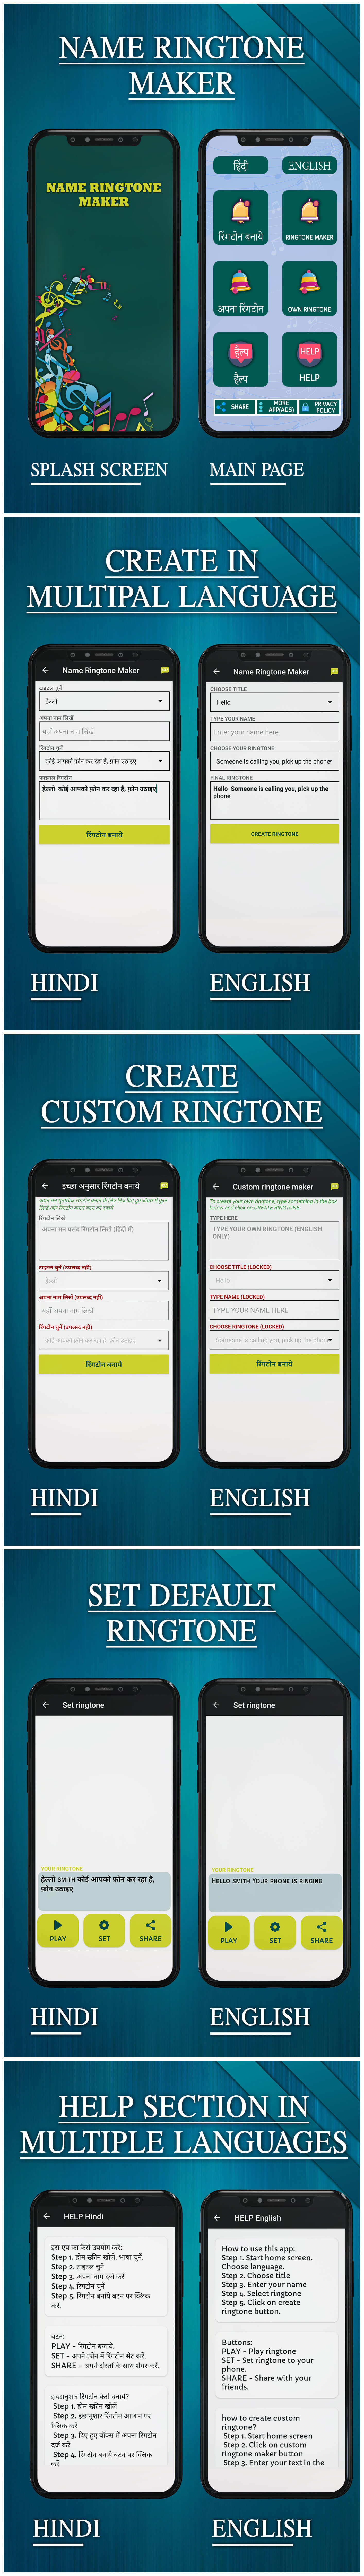 My Name Ringtone Maker Android App |  Admob Ads - 1